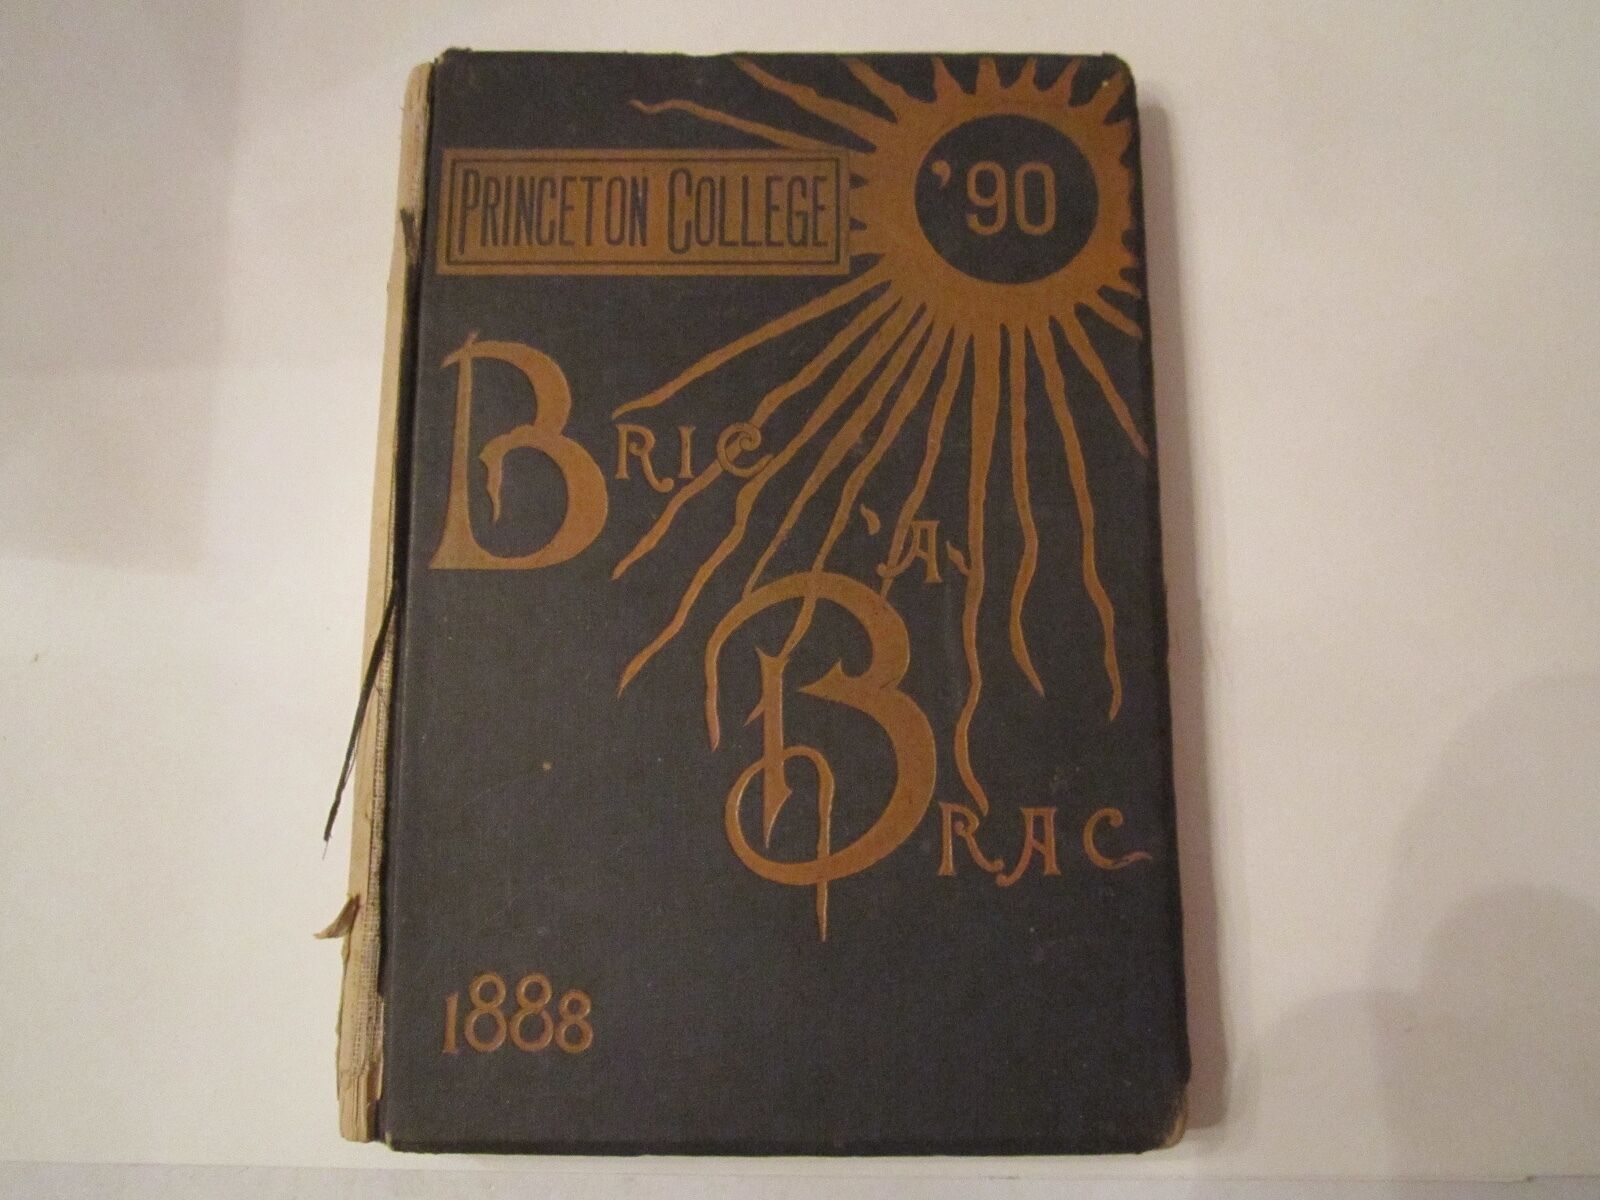 1888 PRINCETON COLLEGE YEARBOOK - SPECTACULAR FIND - BELONGS IN A MUSEUM - AMA